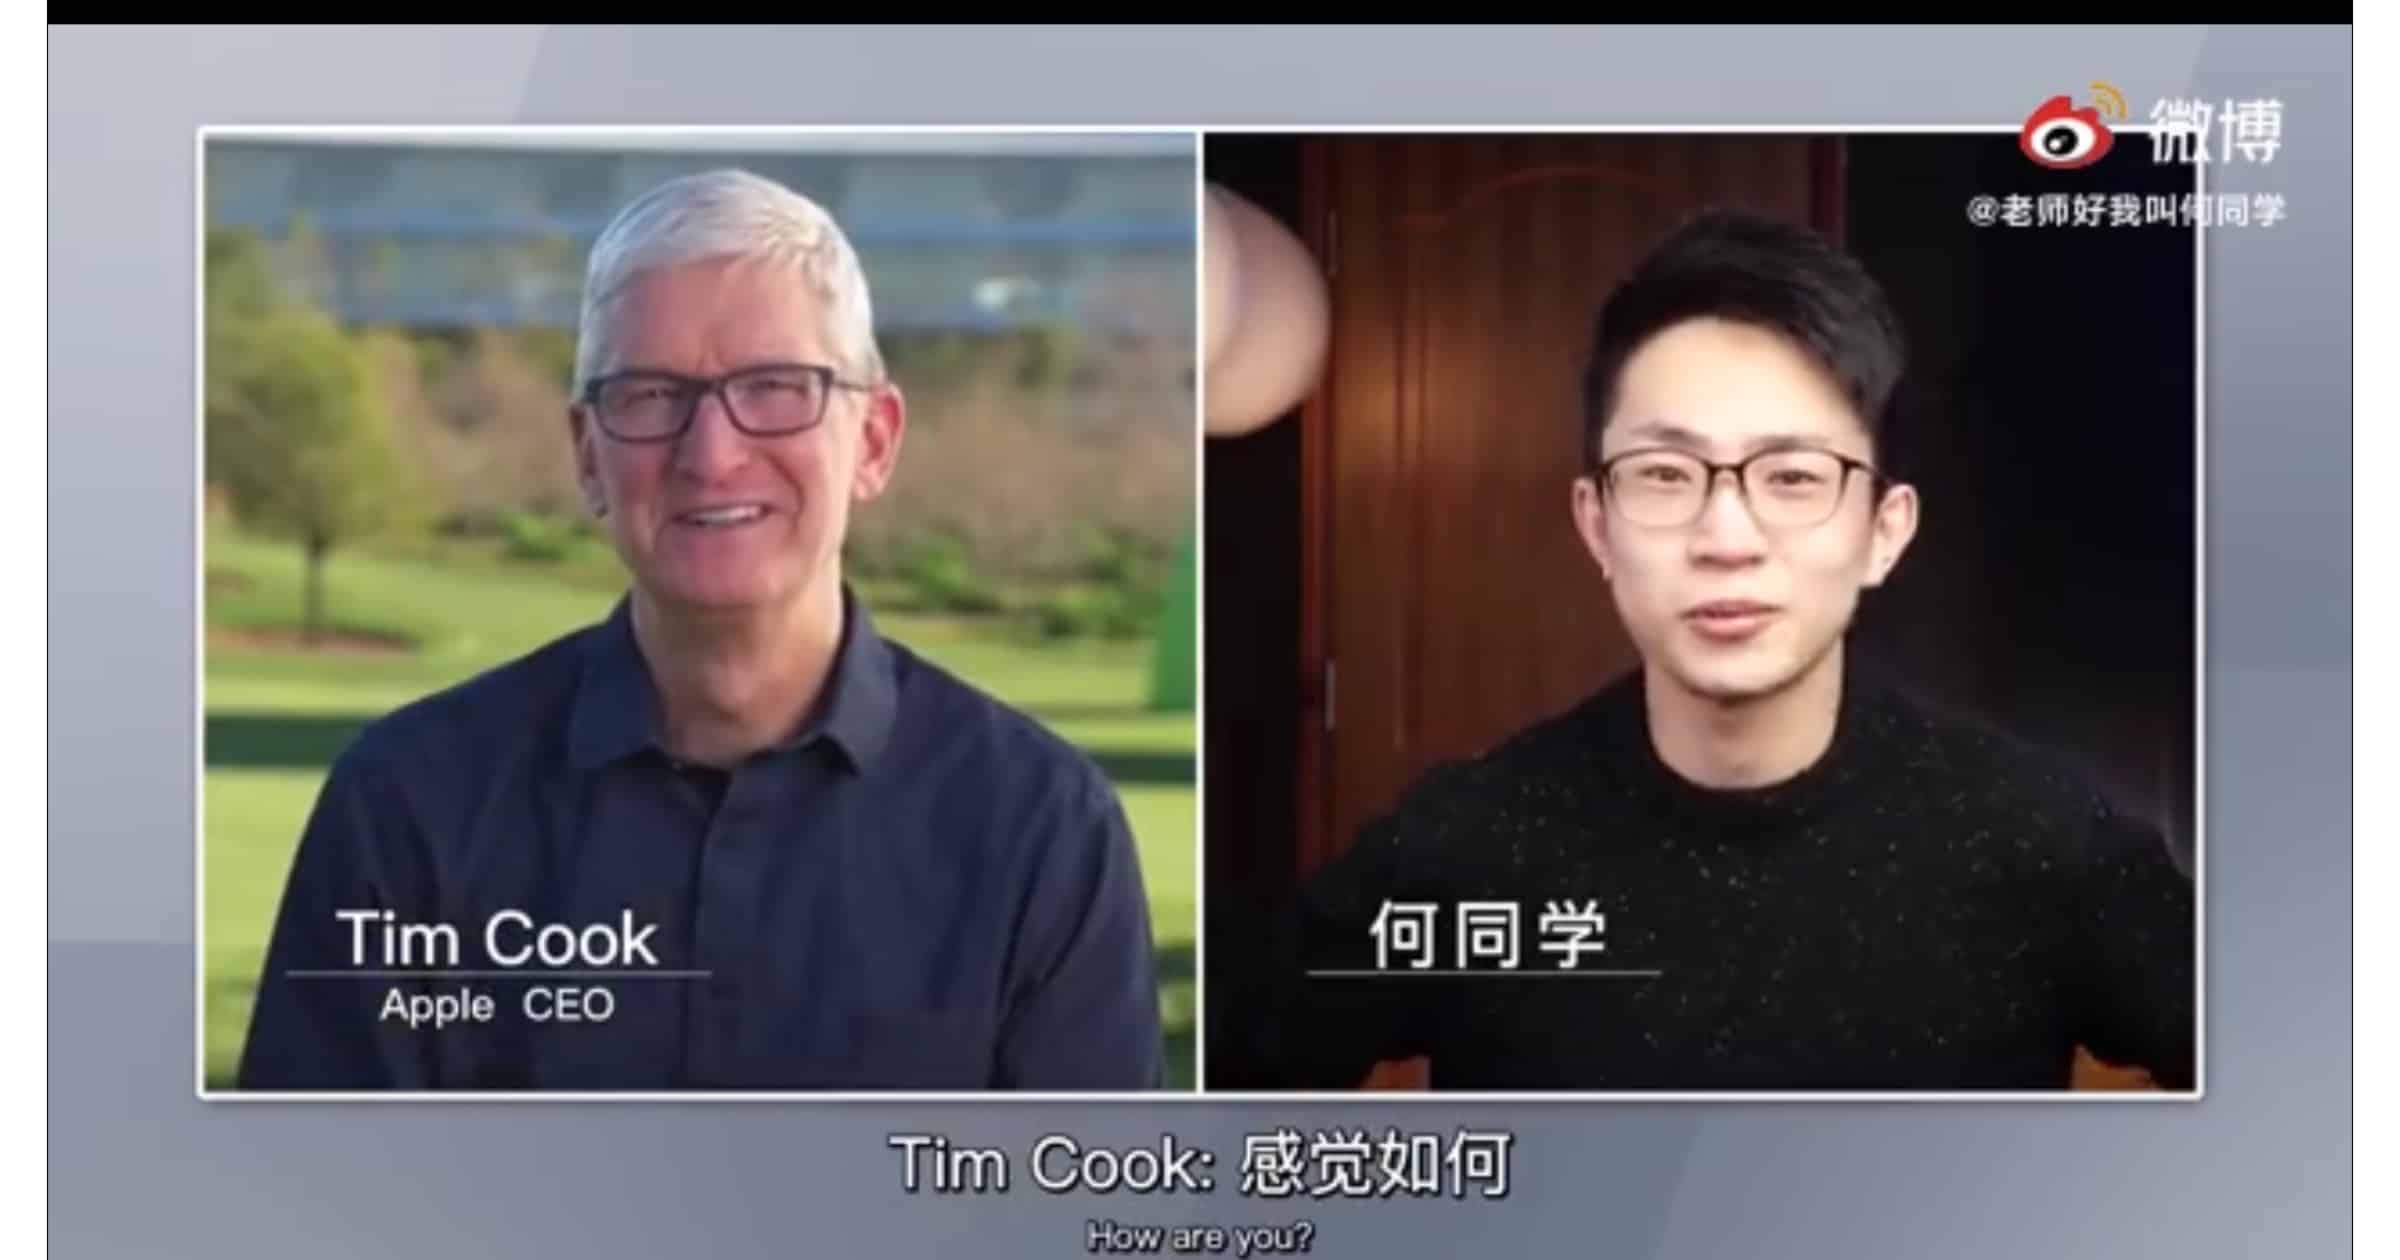 Tim Cook interview on Weibo